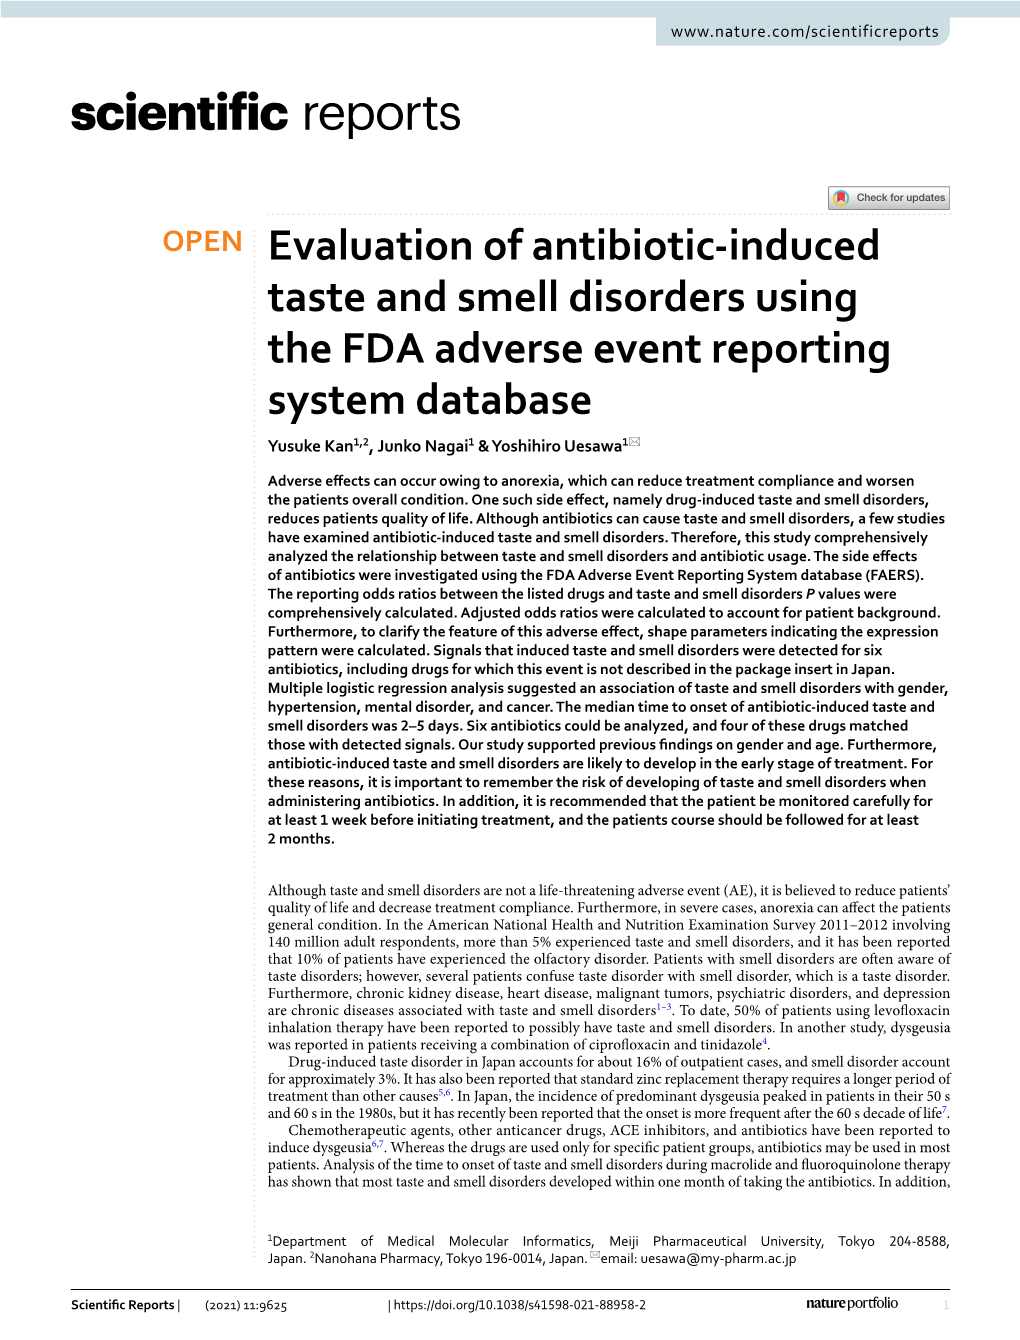 Evaluation of Antibiotic-Induced Taste and Smell Disorders Using the FDA